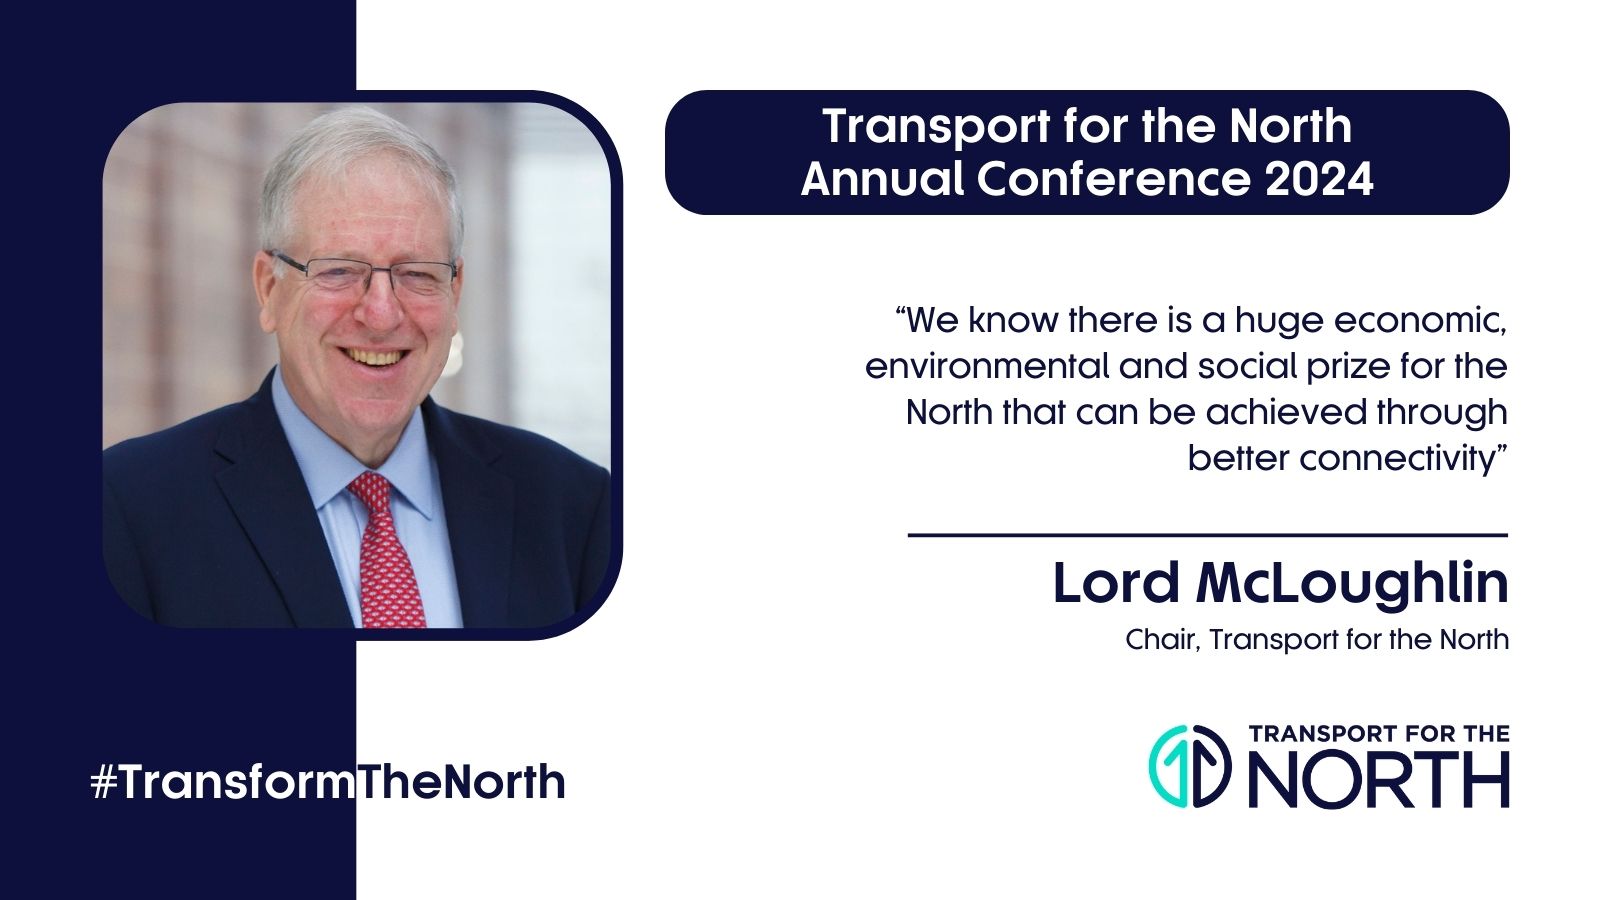 Lord McLoughlin discusses TfN's Annual Conference